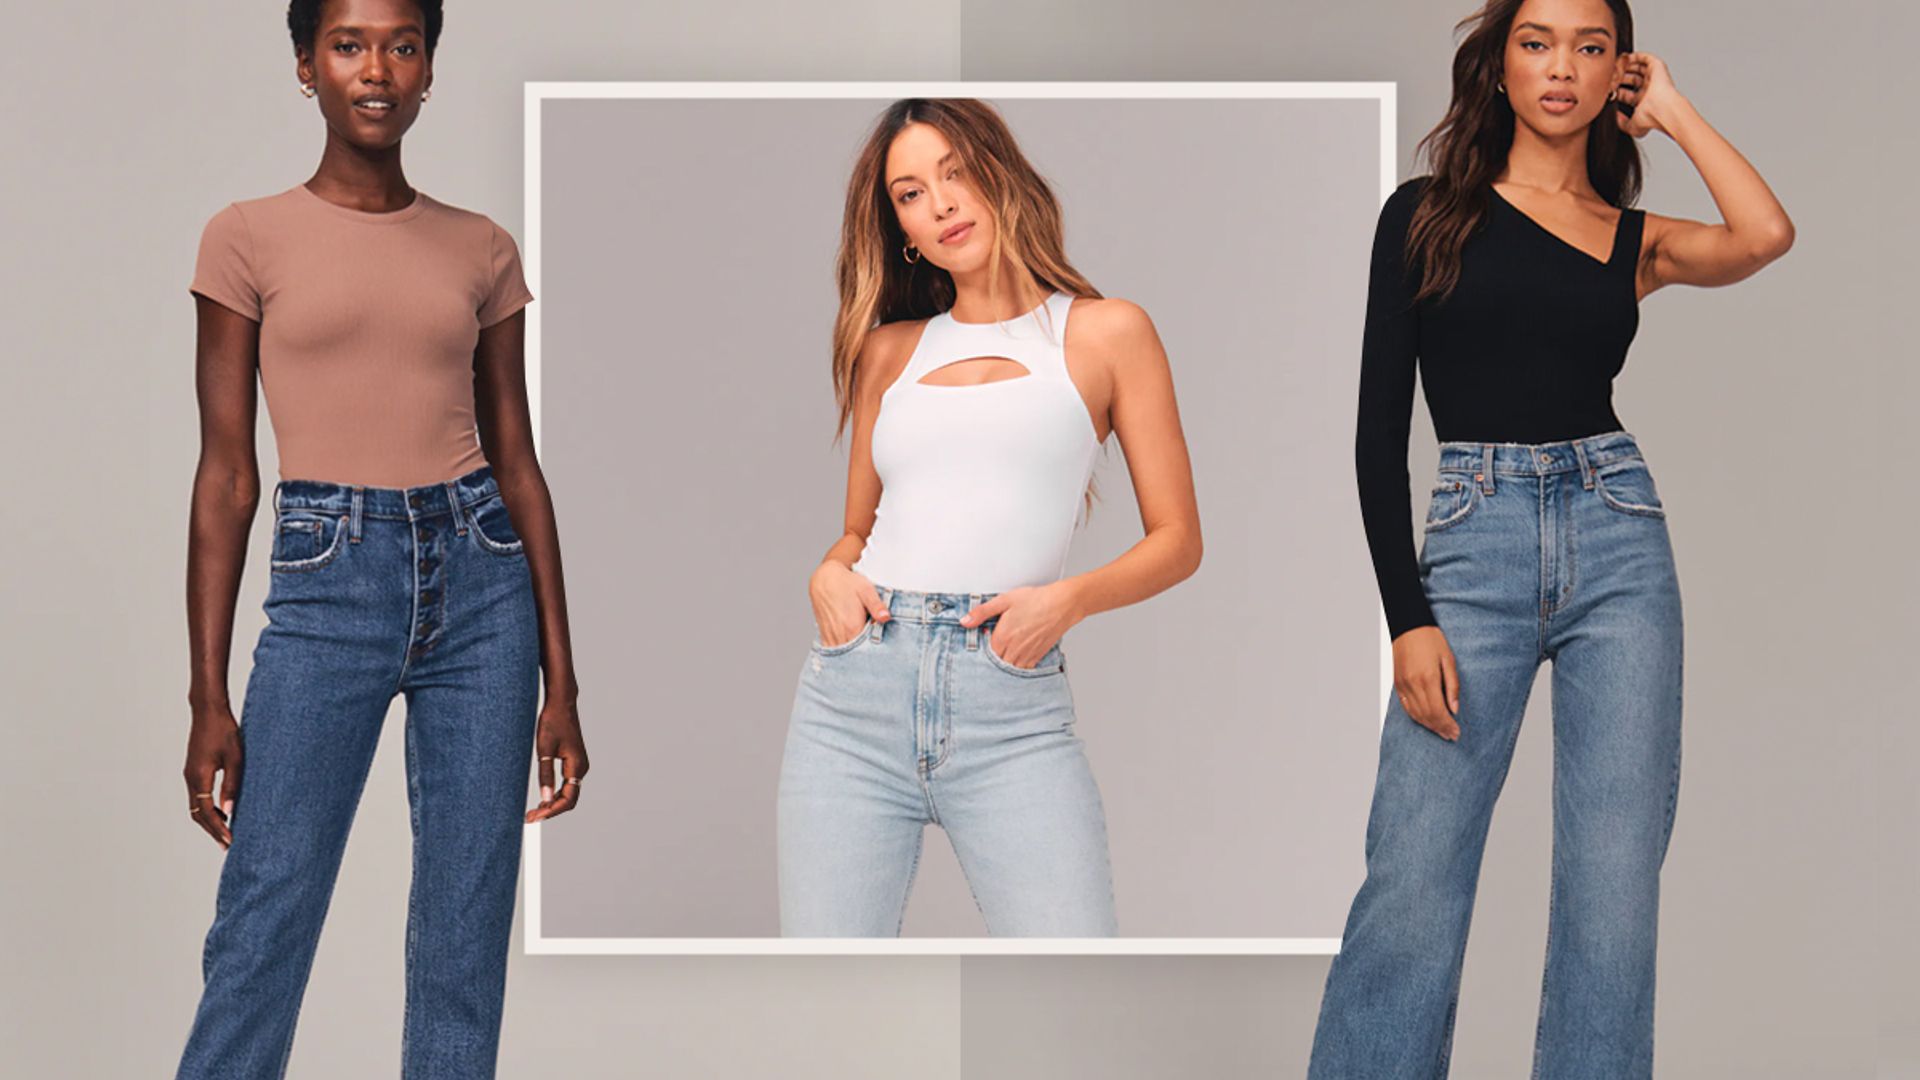 6 new inclusive denim jean styles from Abercrombie & Fitch